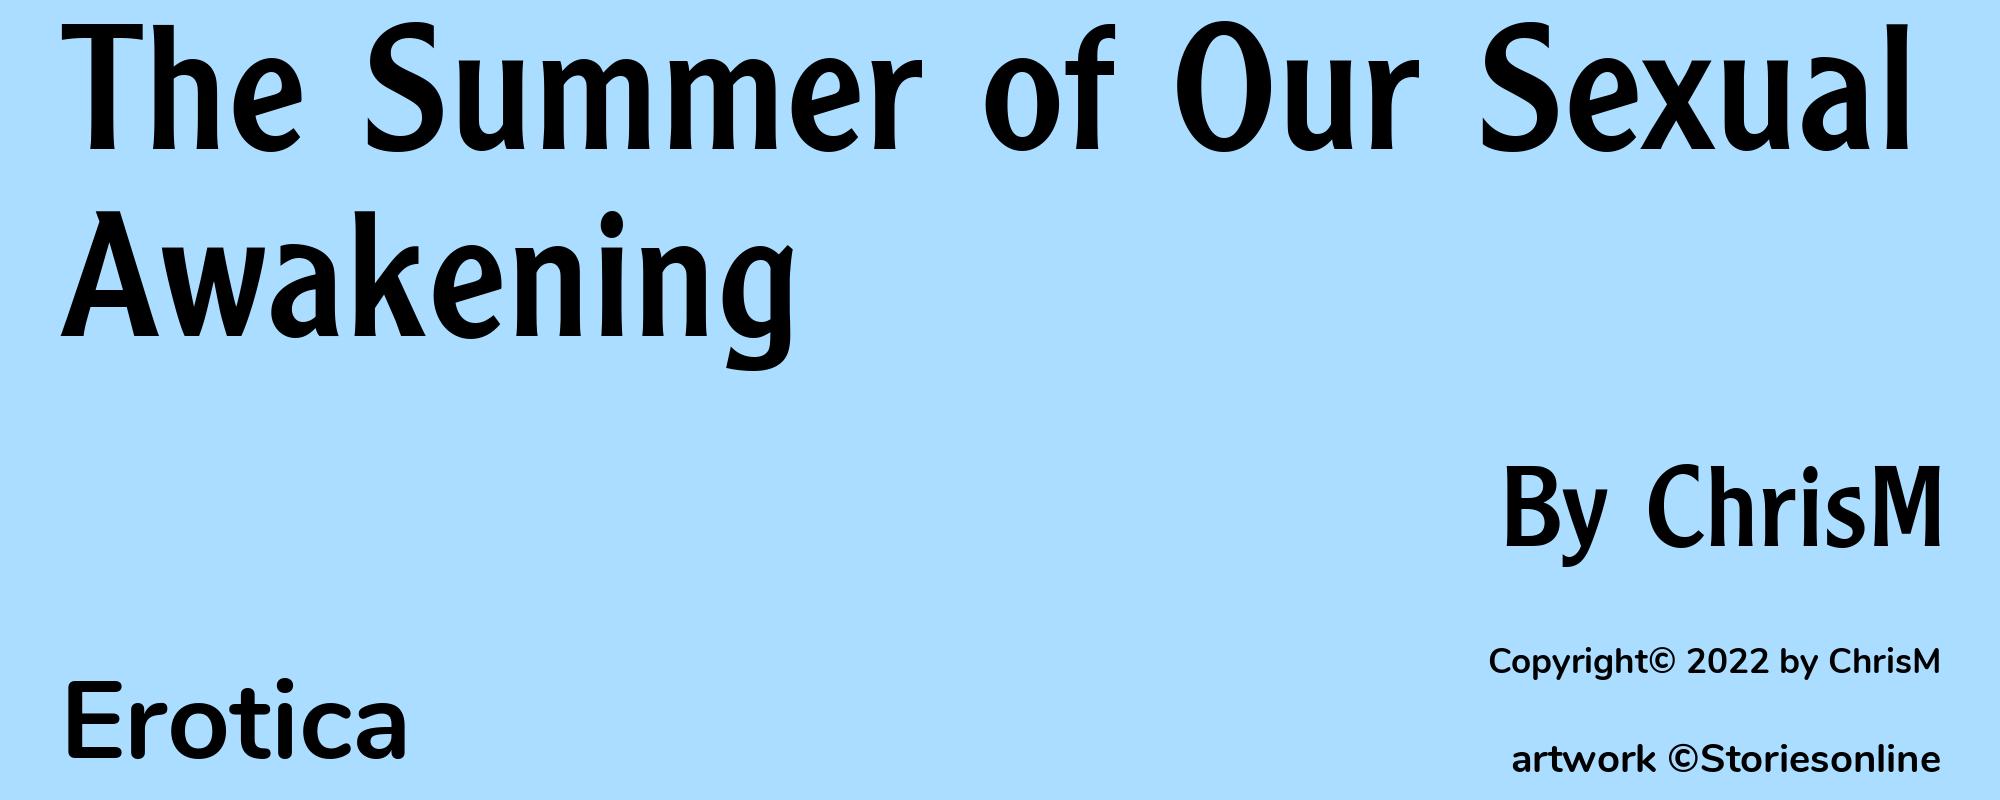 The Summer of Our Sexual Awakening - Cover